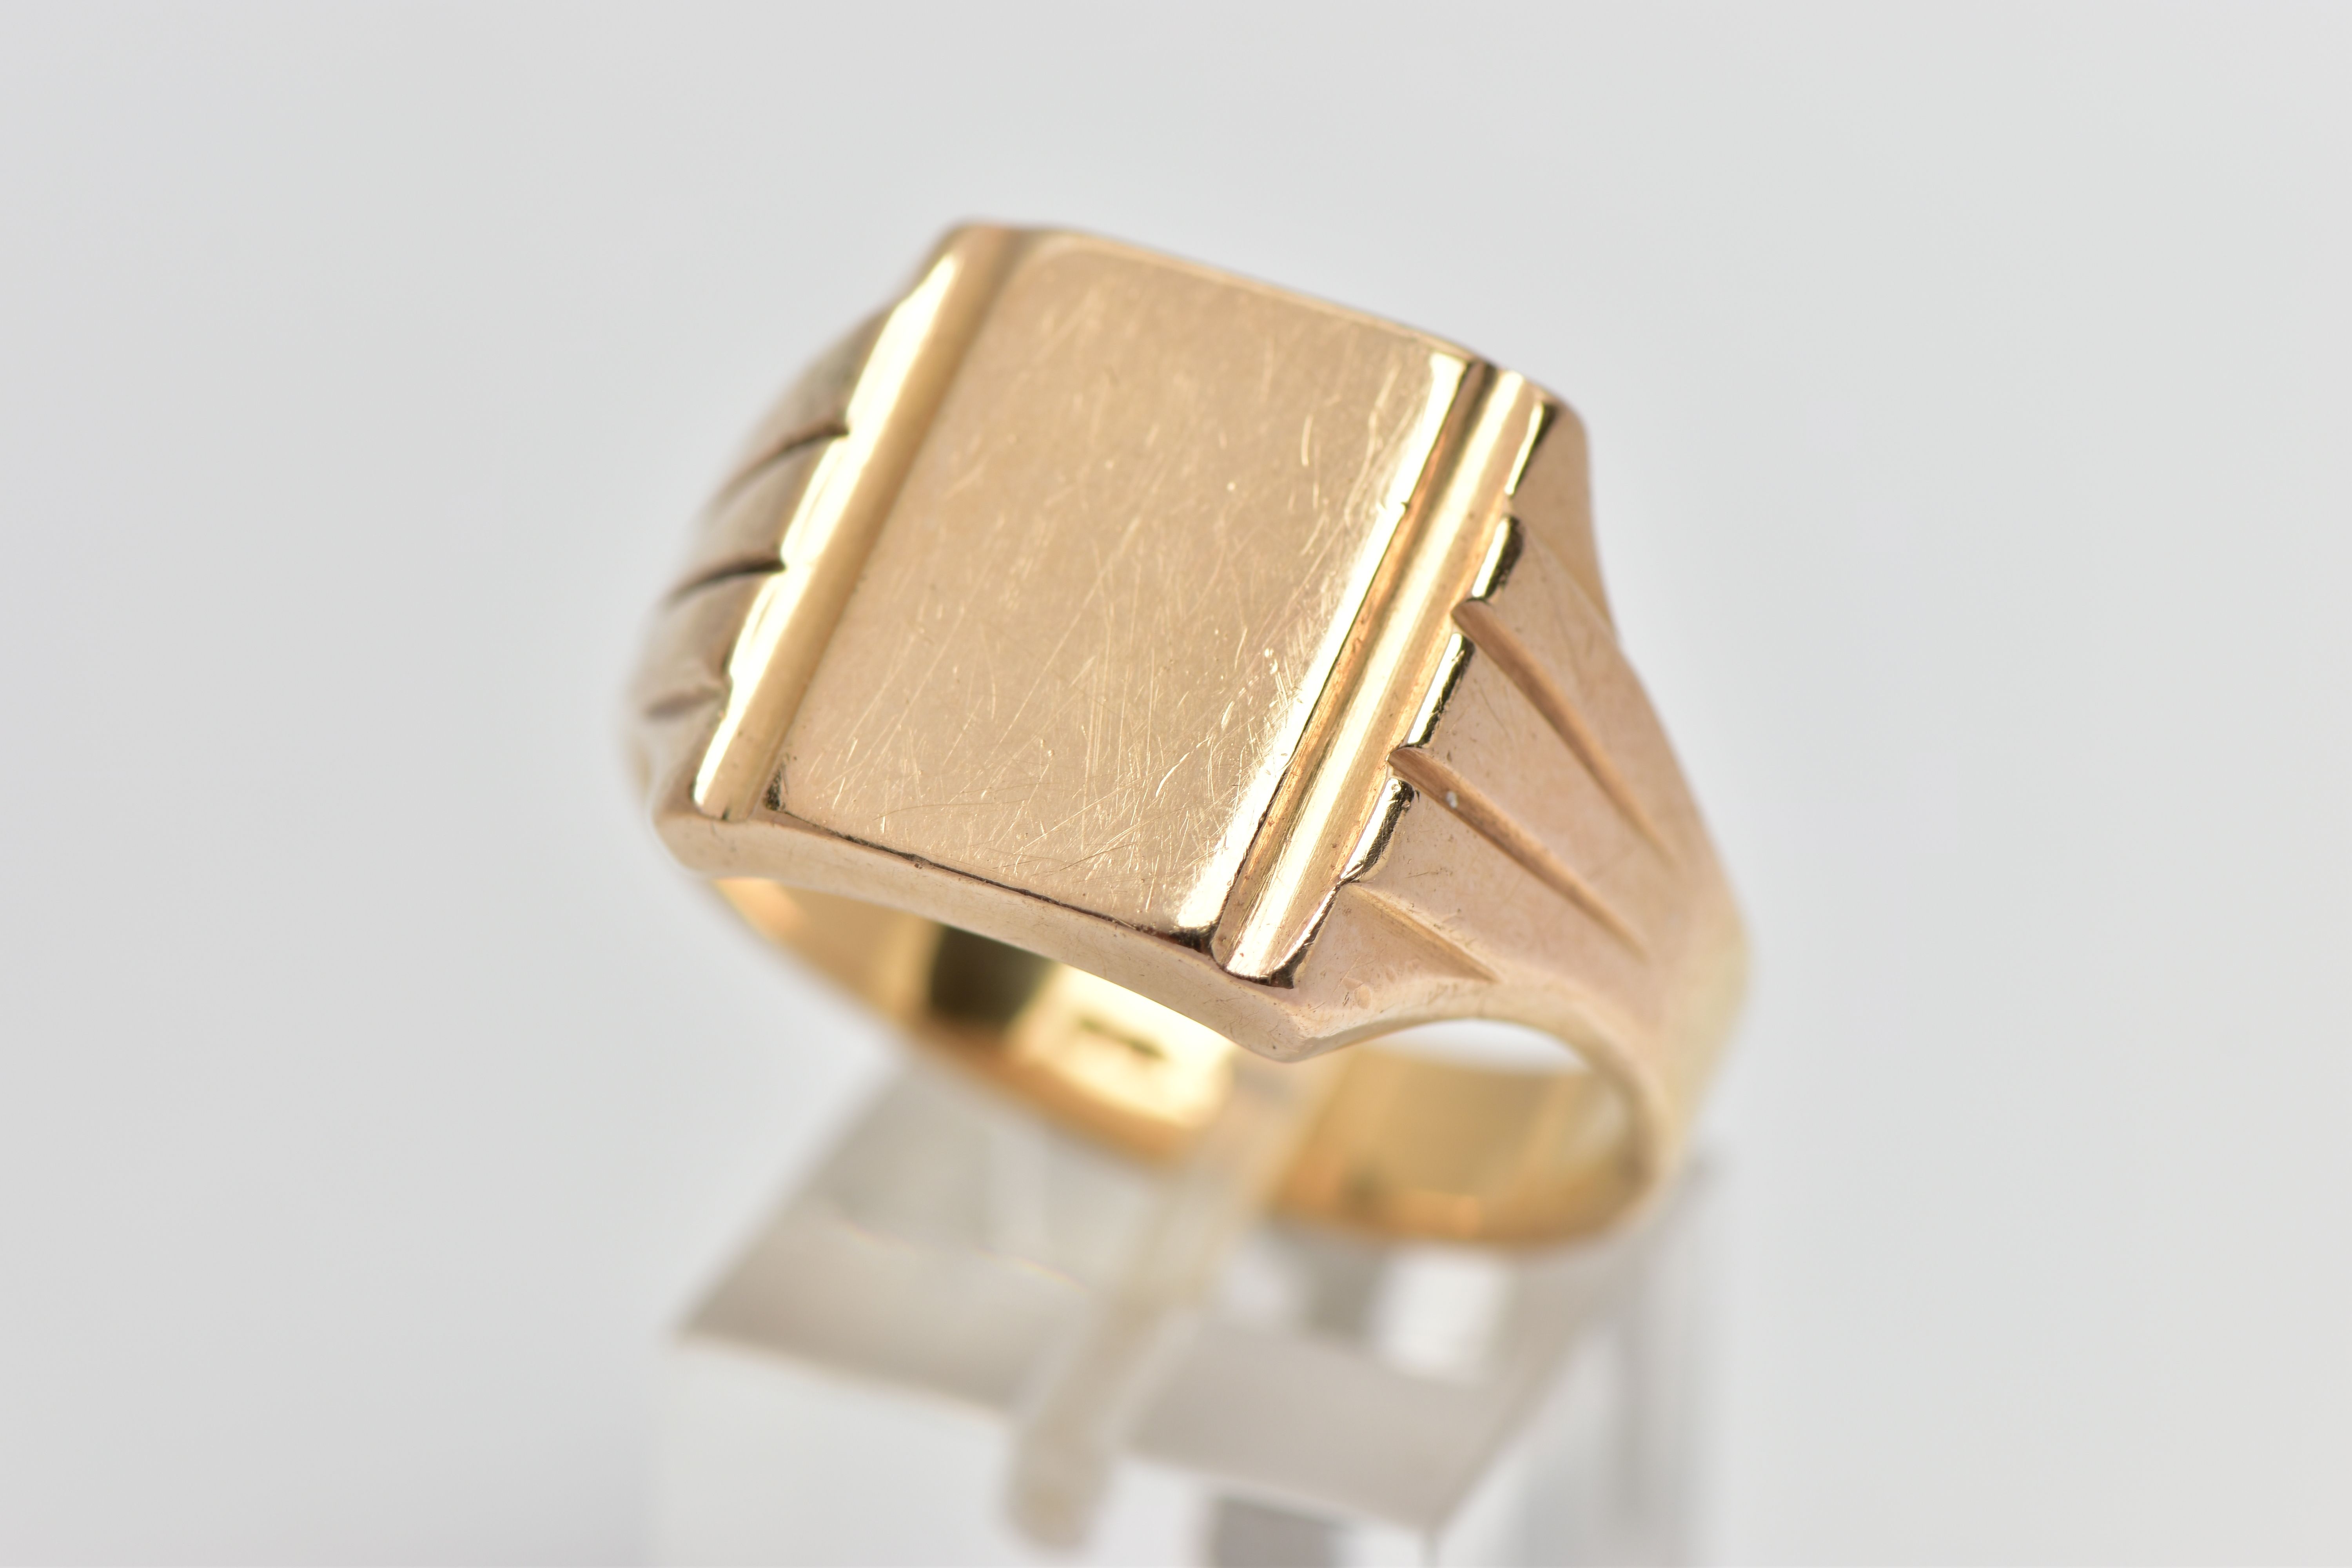 A GENTLEMANS YELLOW METAL SIGNET RING, designed as a rectangular shape plain polished panel, with